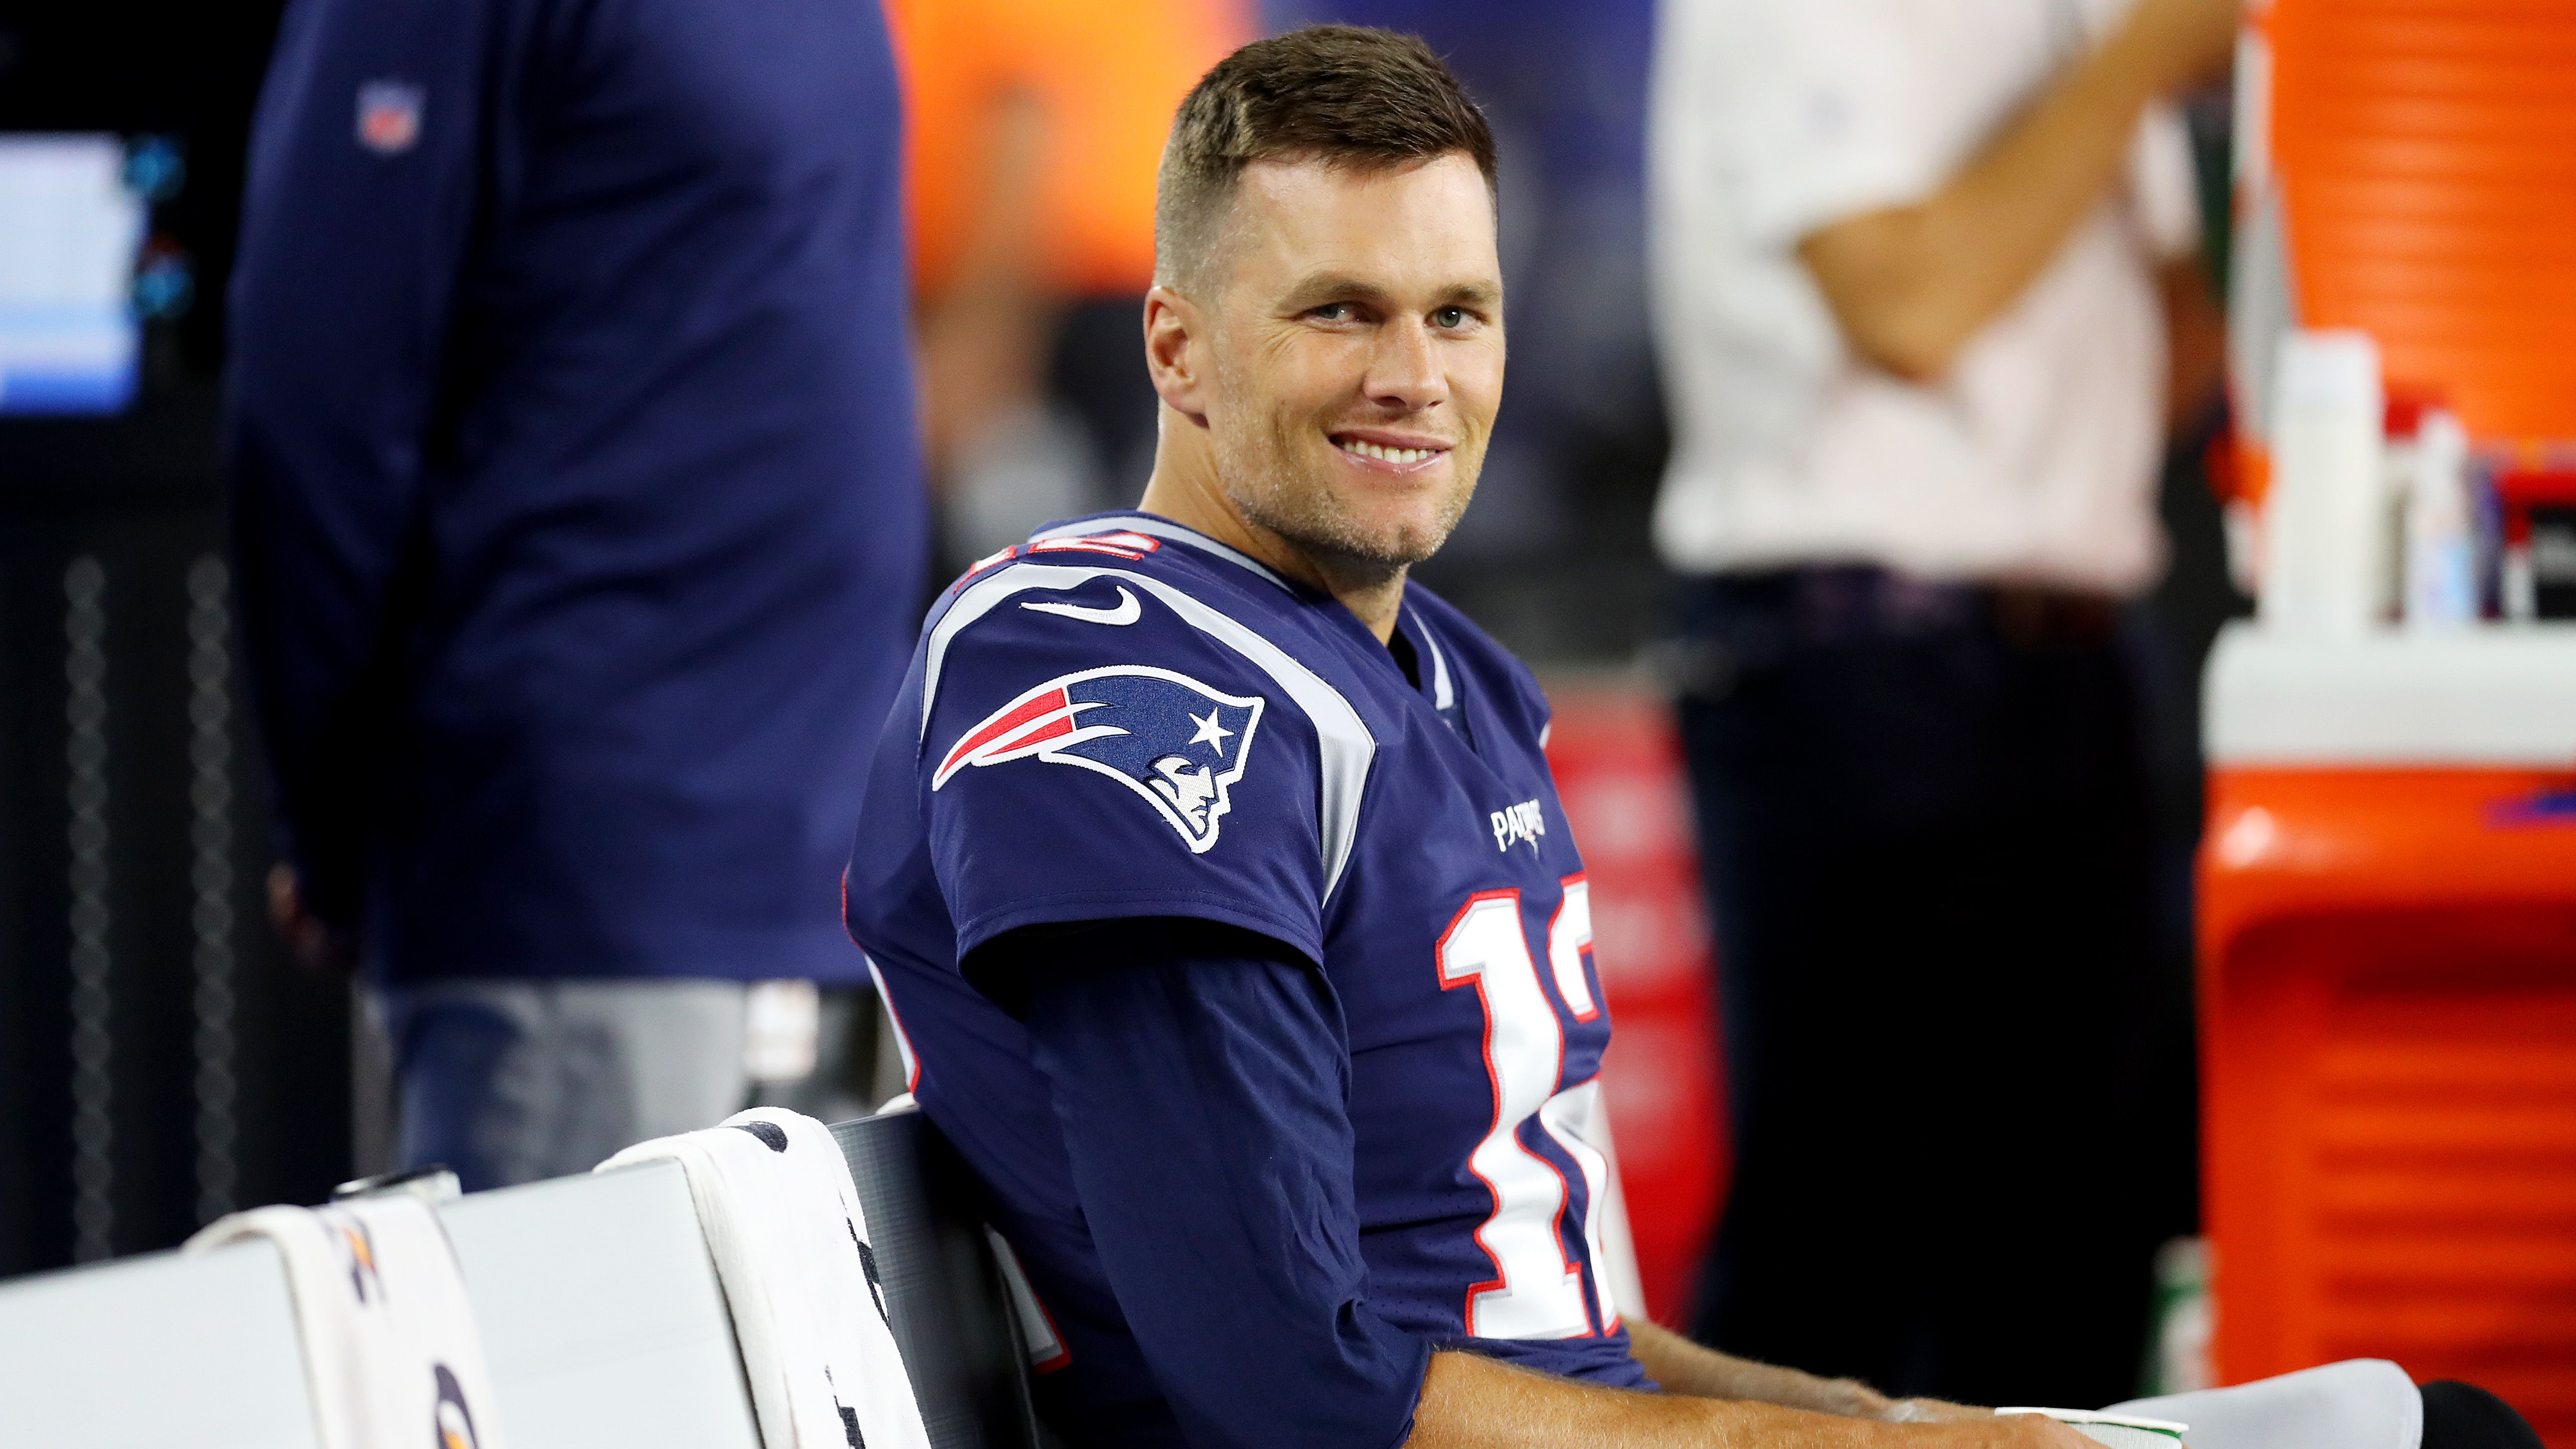 Tom Brady's Book, The TB12 Method Is a New York Times Best Seller